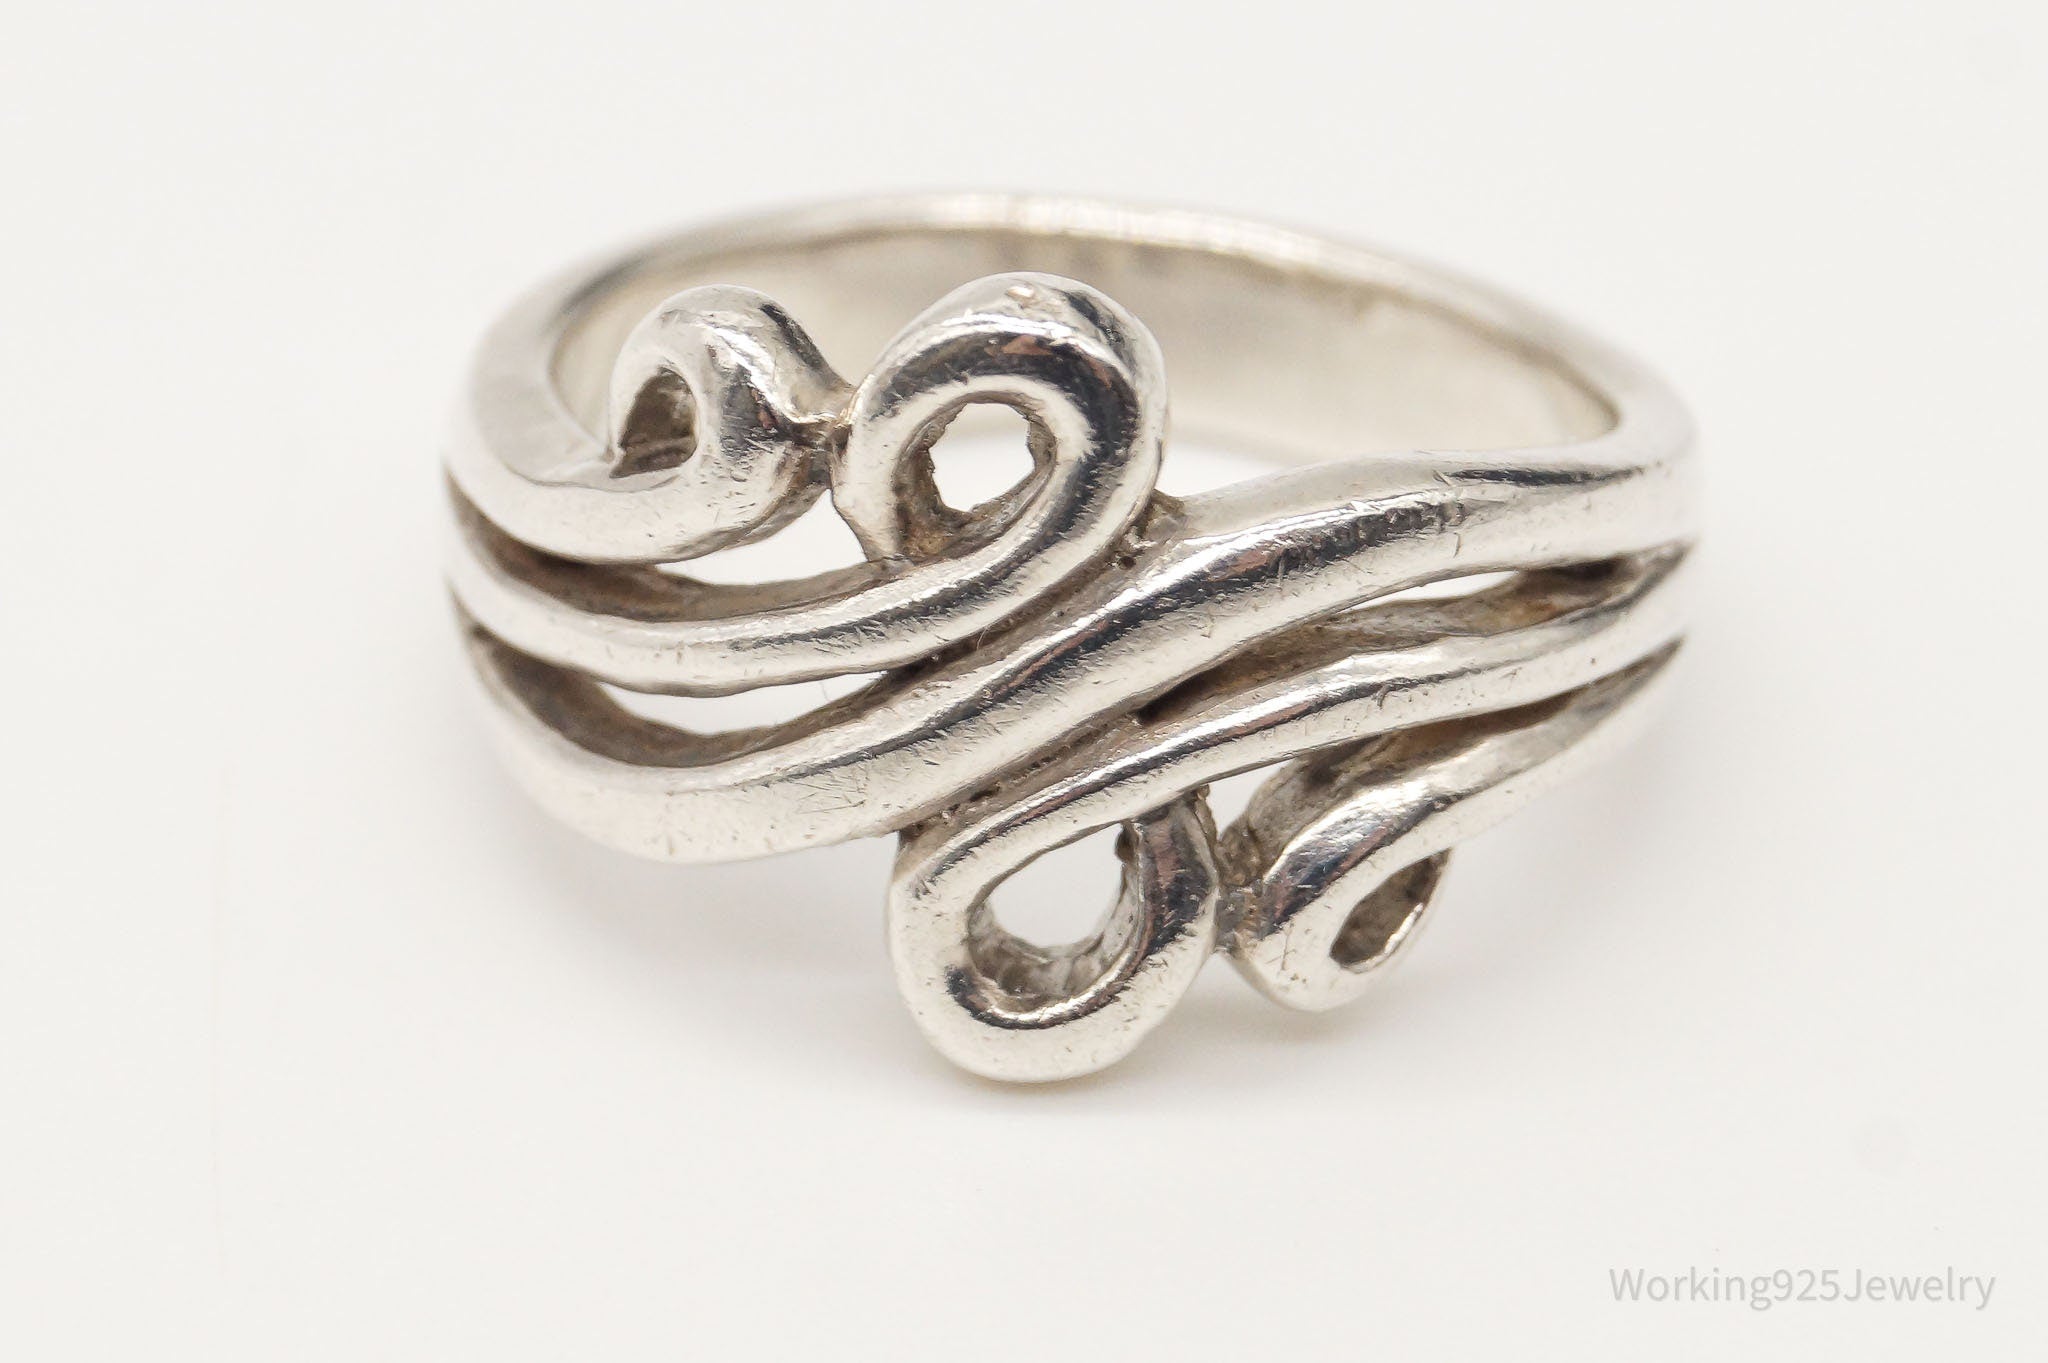 Vintage Swirl Scroll Sterling Silver Band Ring Size 6.5